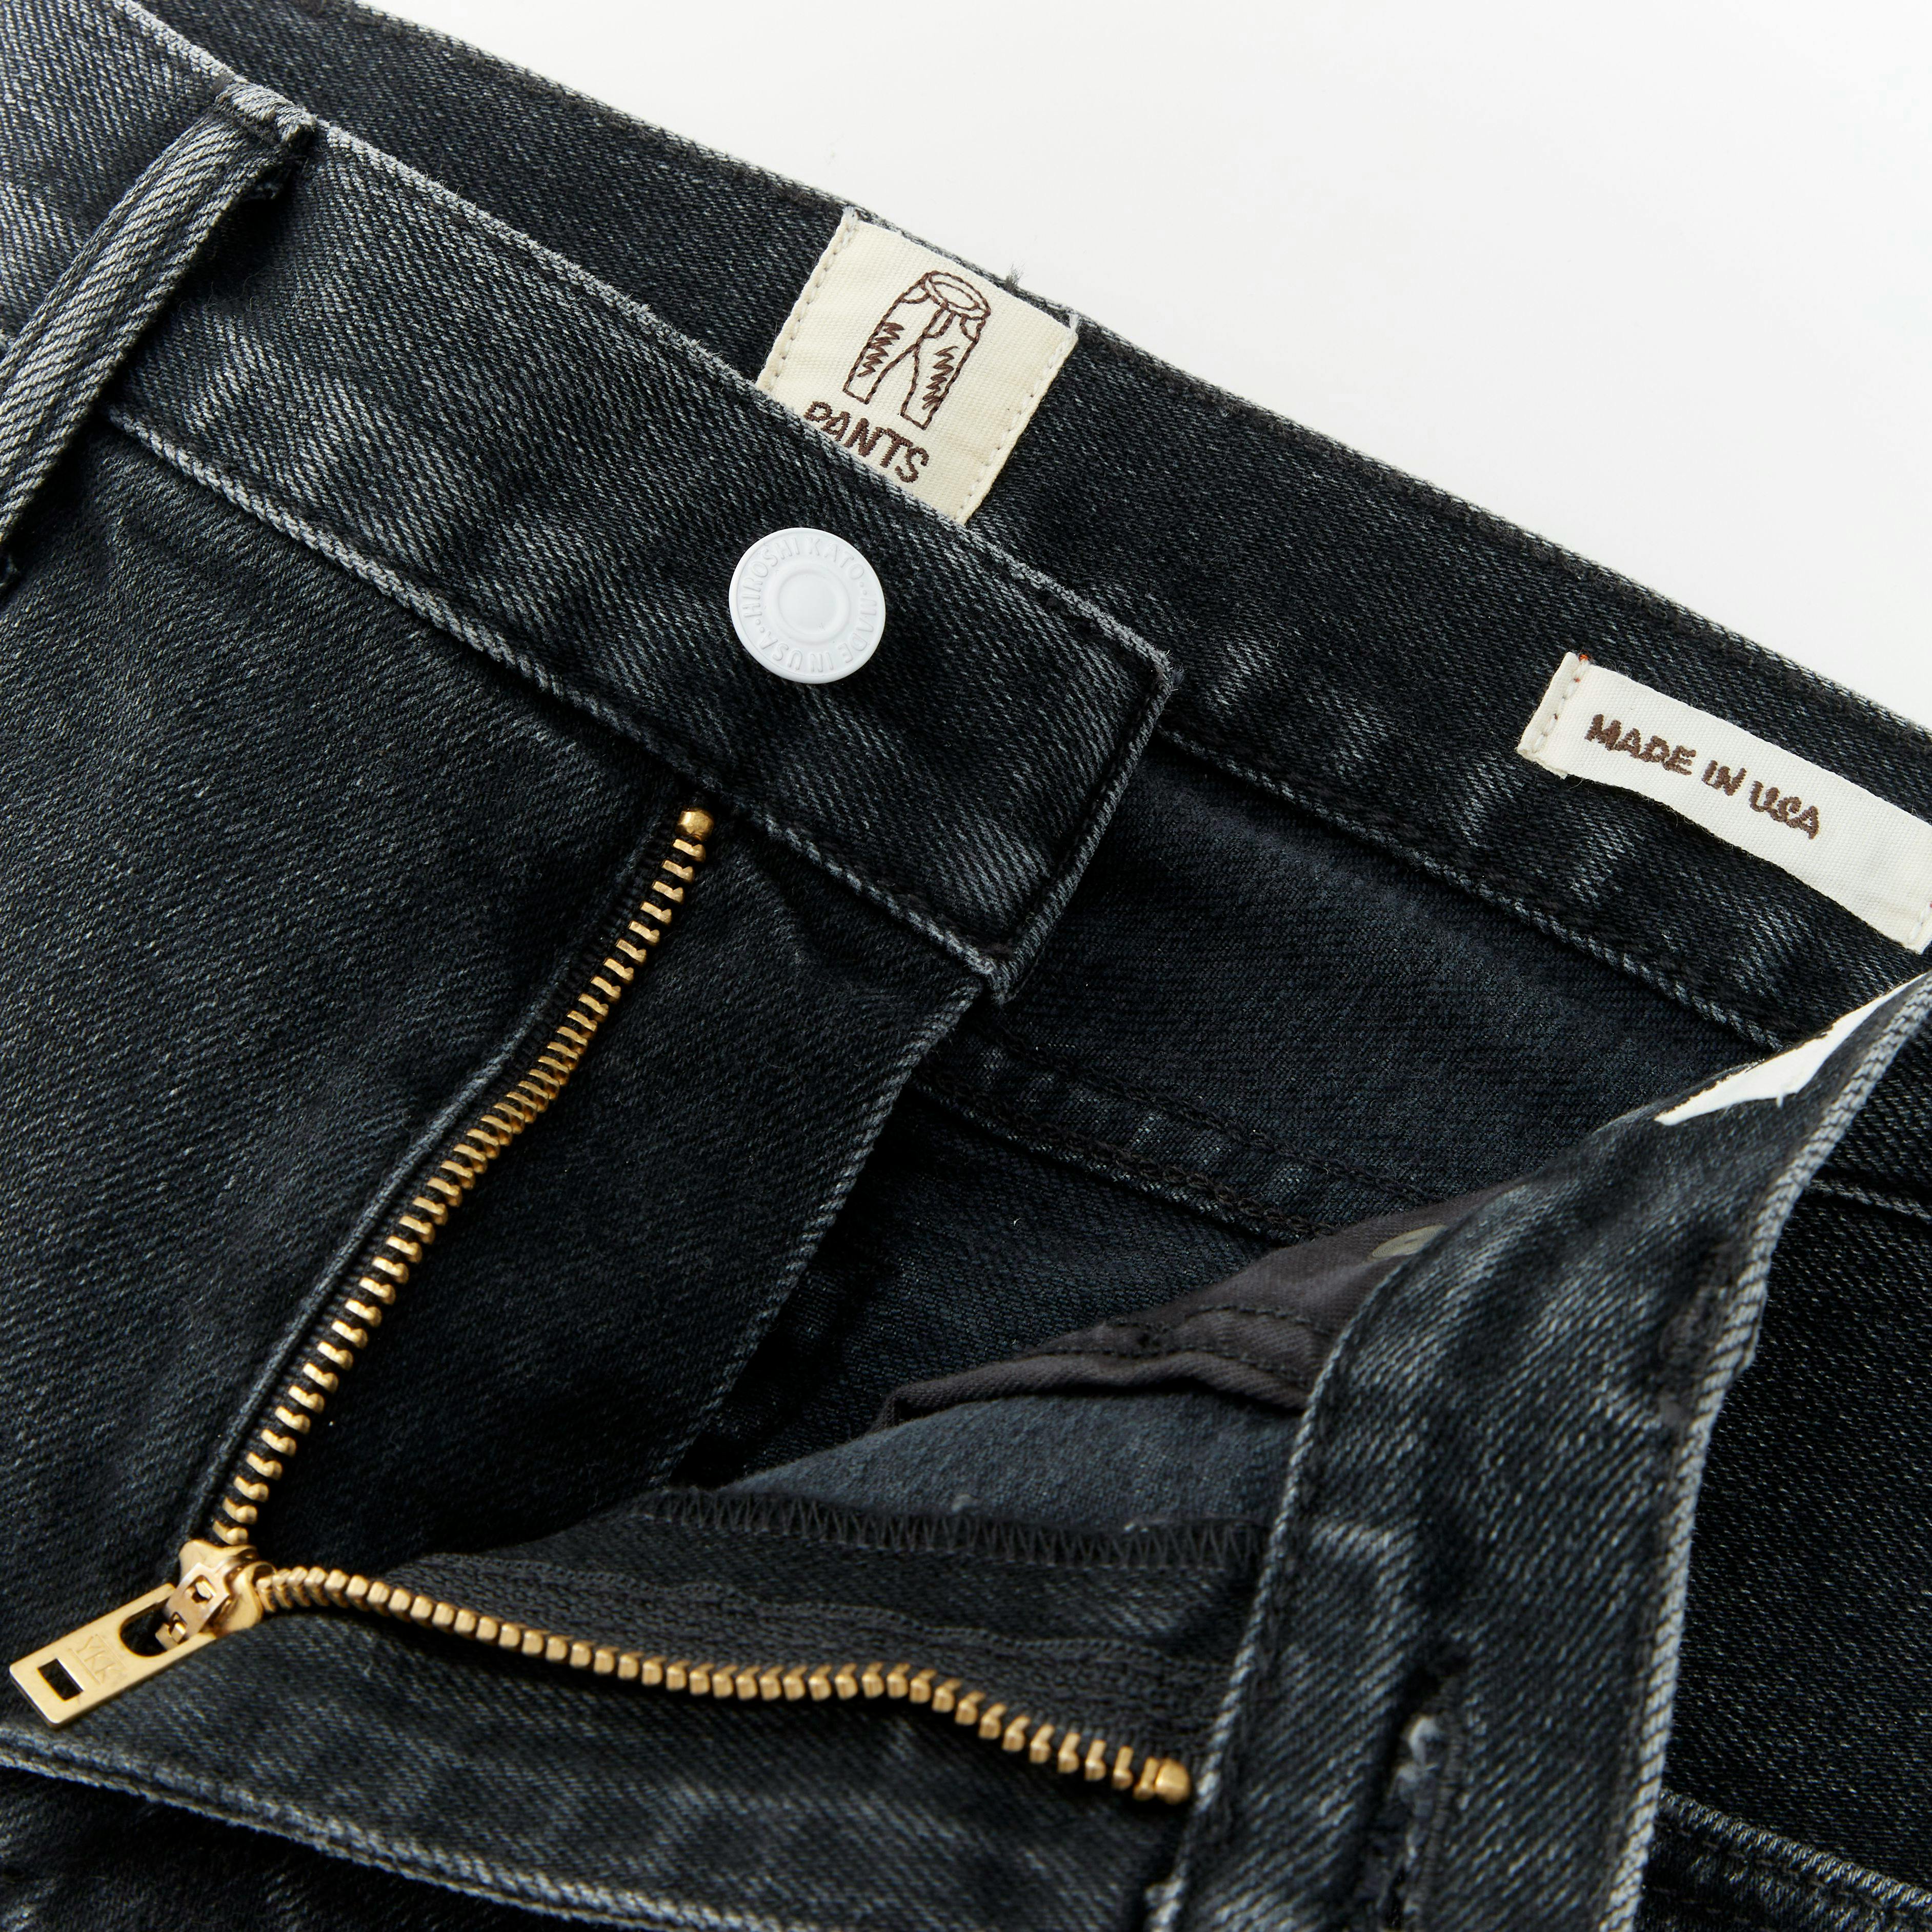 4 Really Cool Ways to Make Jeans Bigger